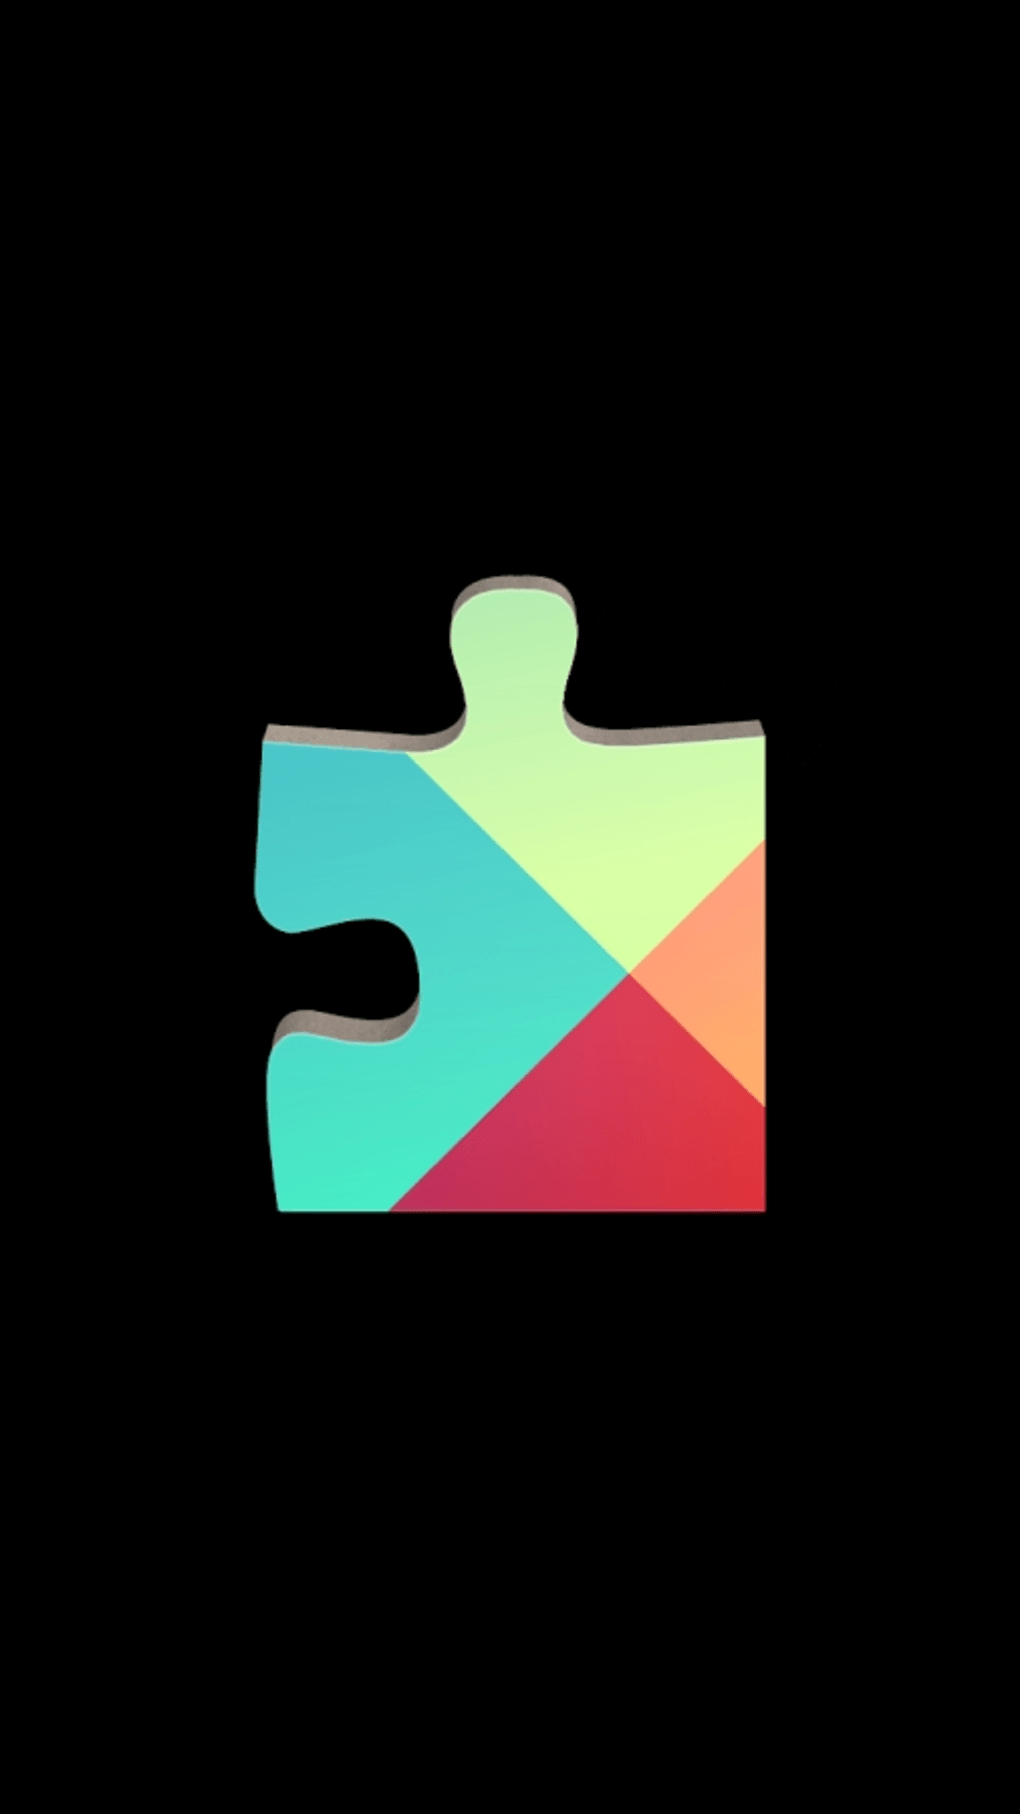 Google Play Services Apk Free Download For Mobile